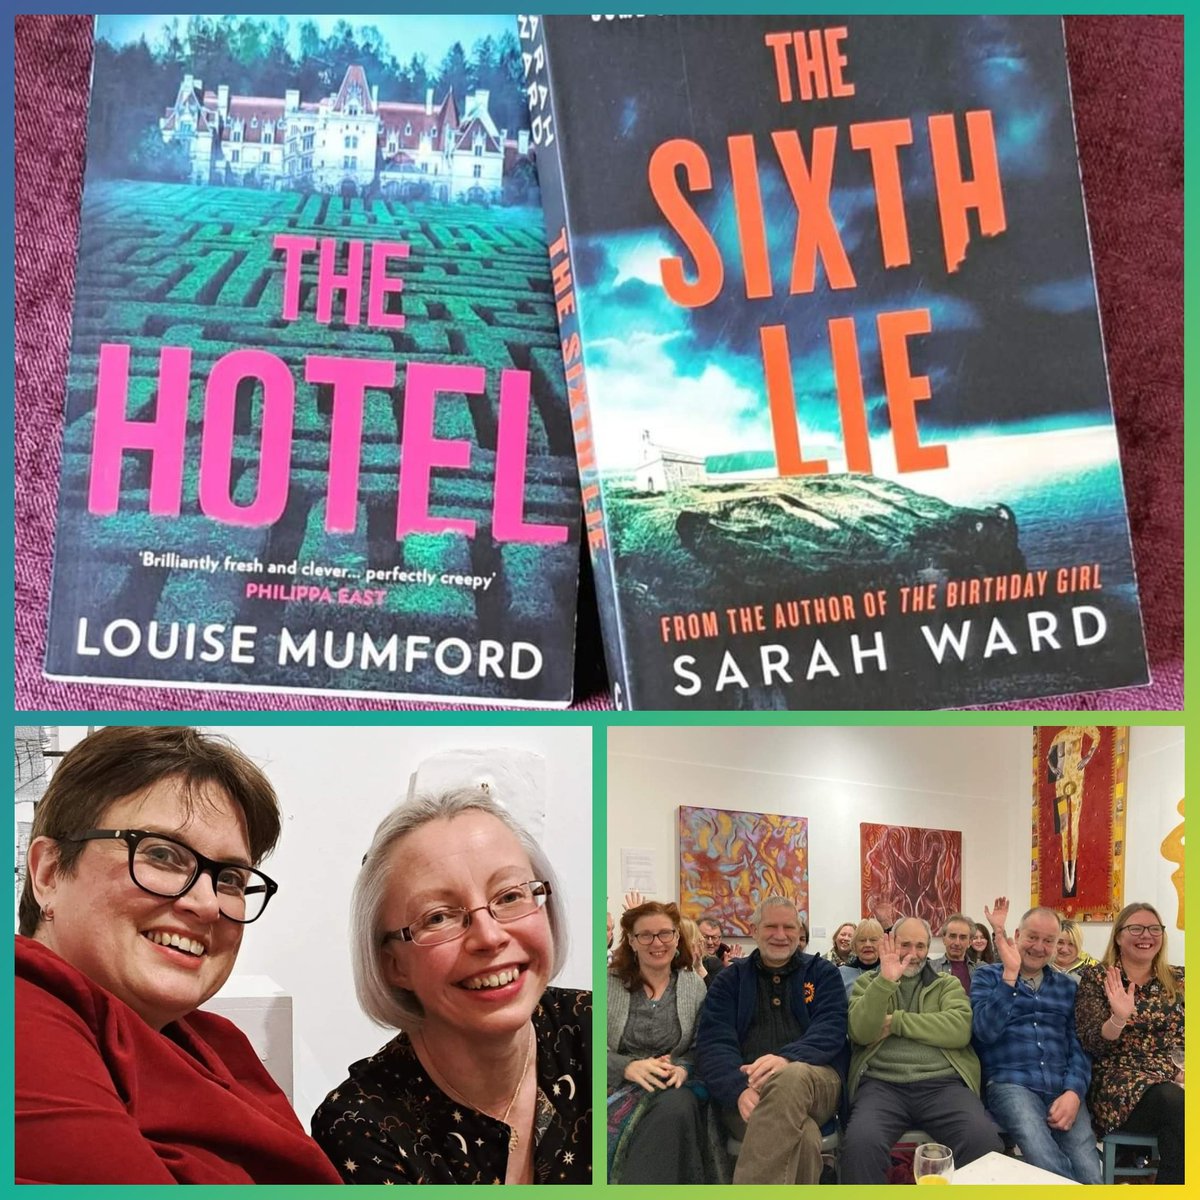 It is a long way from Cardiff to Aberaeron but IT WAS WORTH IT! Fab event at Gallery Gwyn on Friday evening with @GwisgoBookworm talking all things THE HOTEL with fellow author @sarahrward1 who spoke about THE SIXTH LIE. (I edited Book 4 in the car. I wasn't driving!)